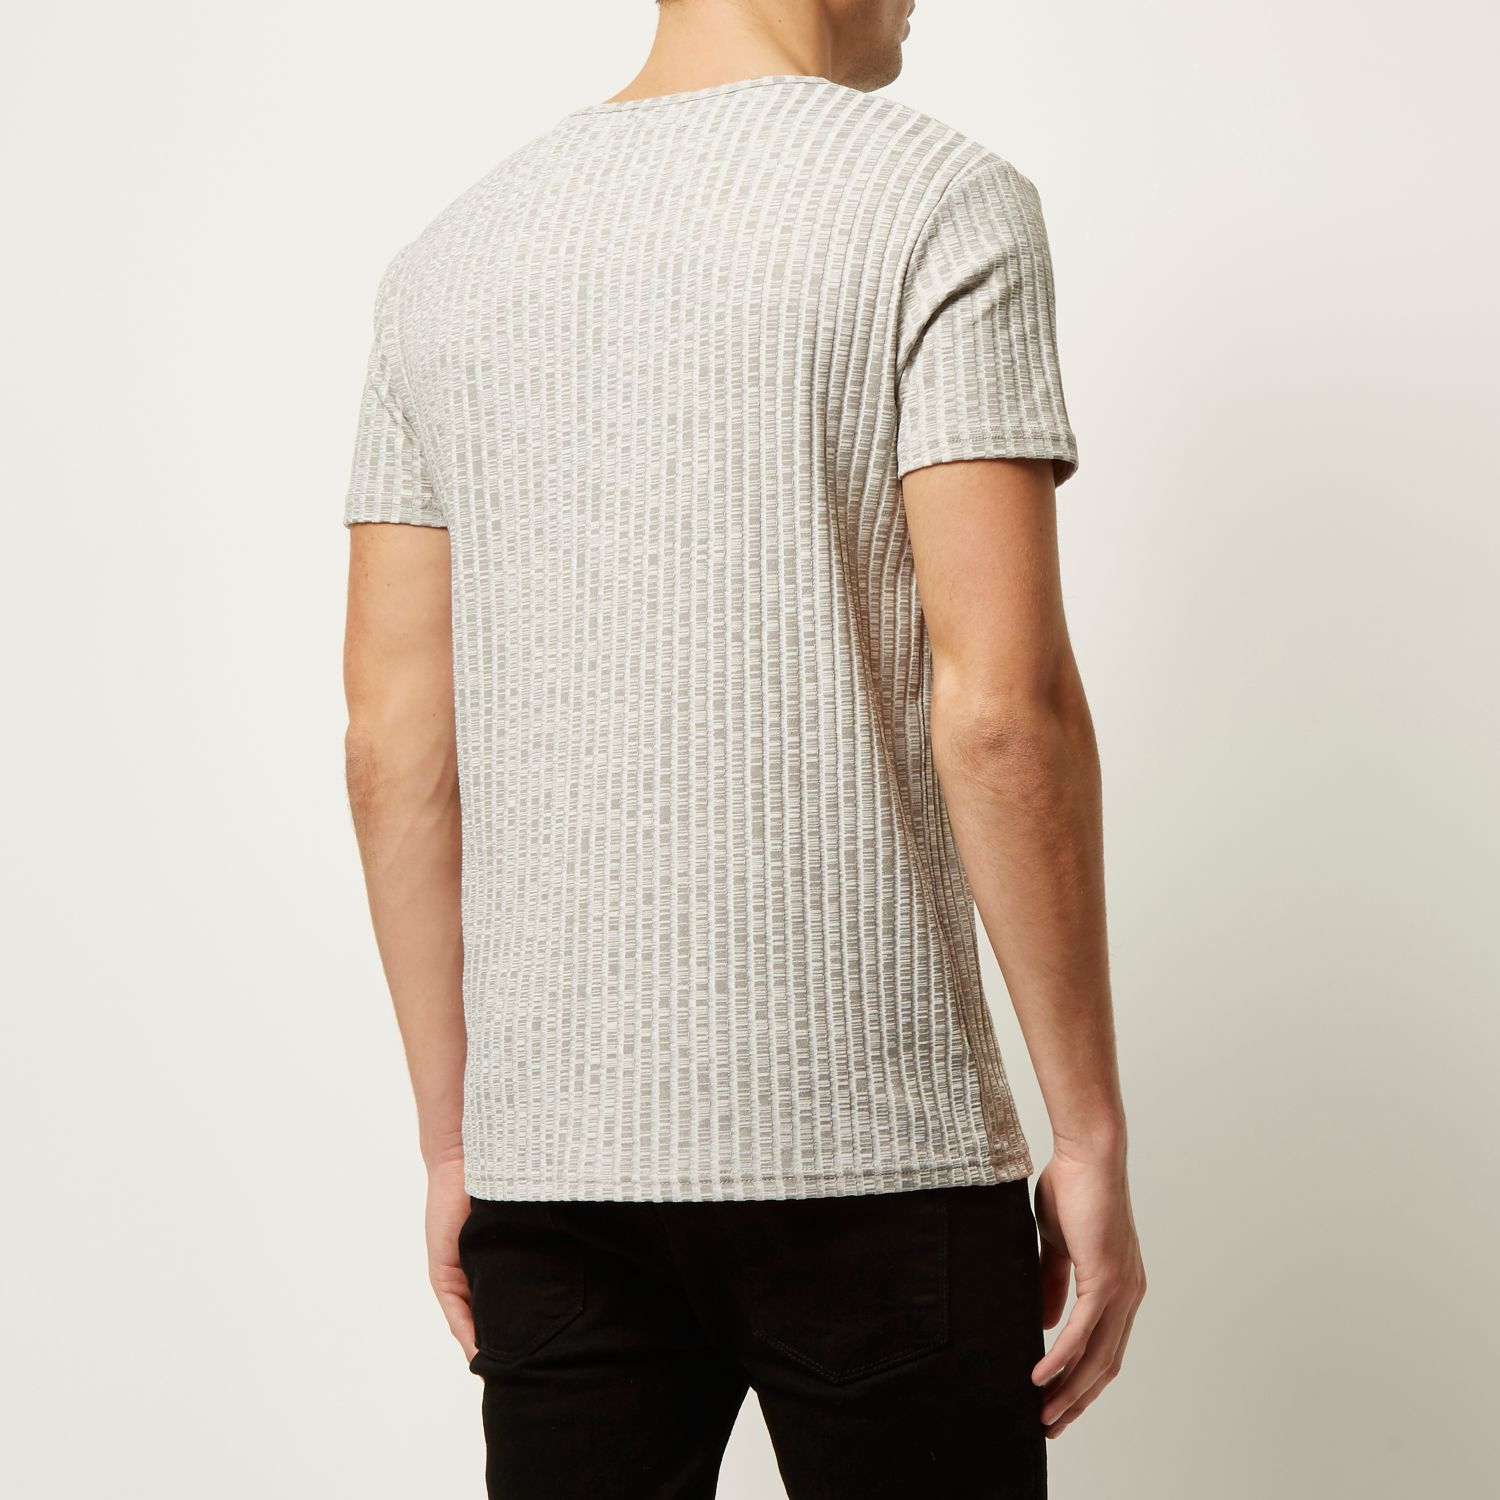 River Island Cotton Light Grey Chunky Ribbed T-shirt in Gray for Men - Lyst